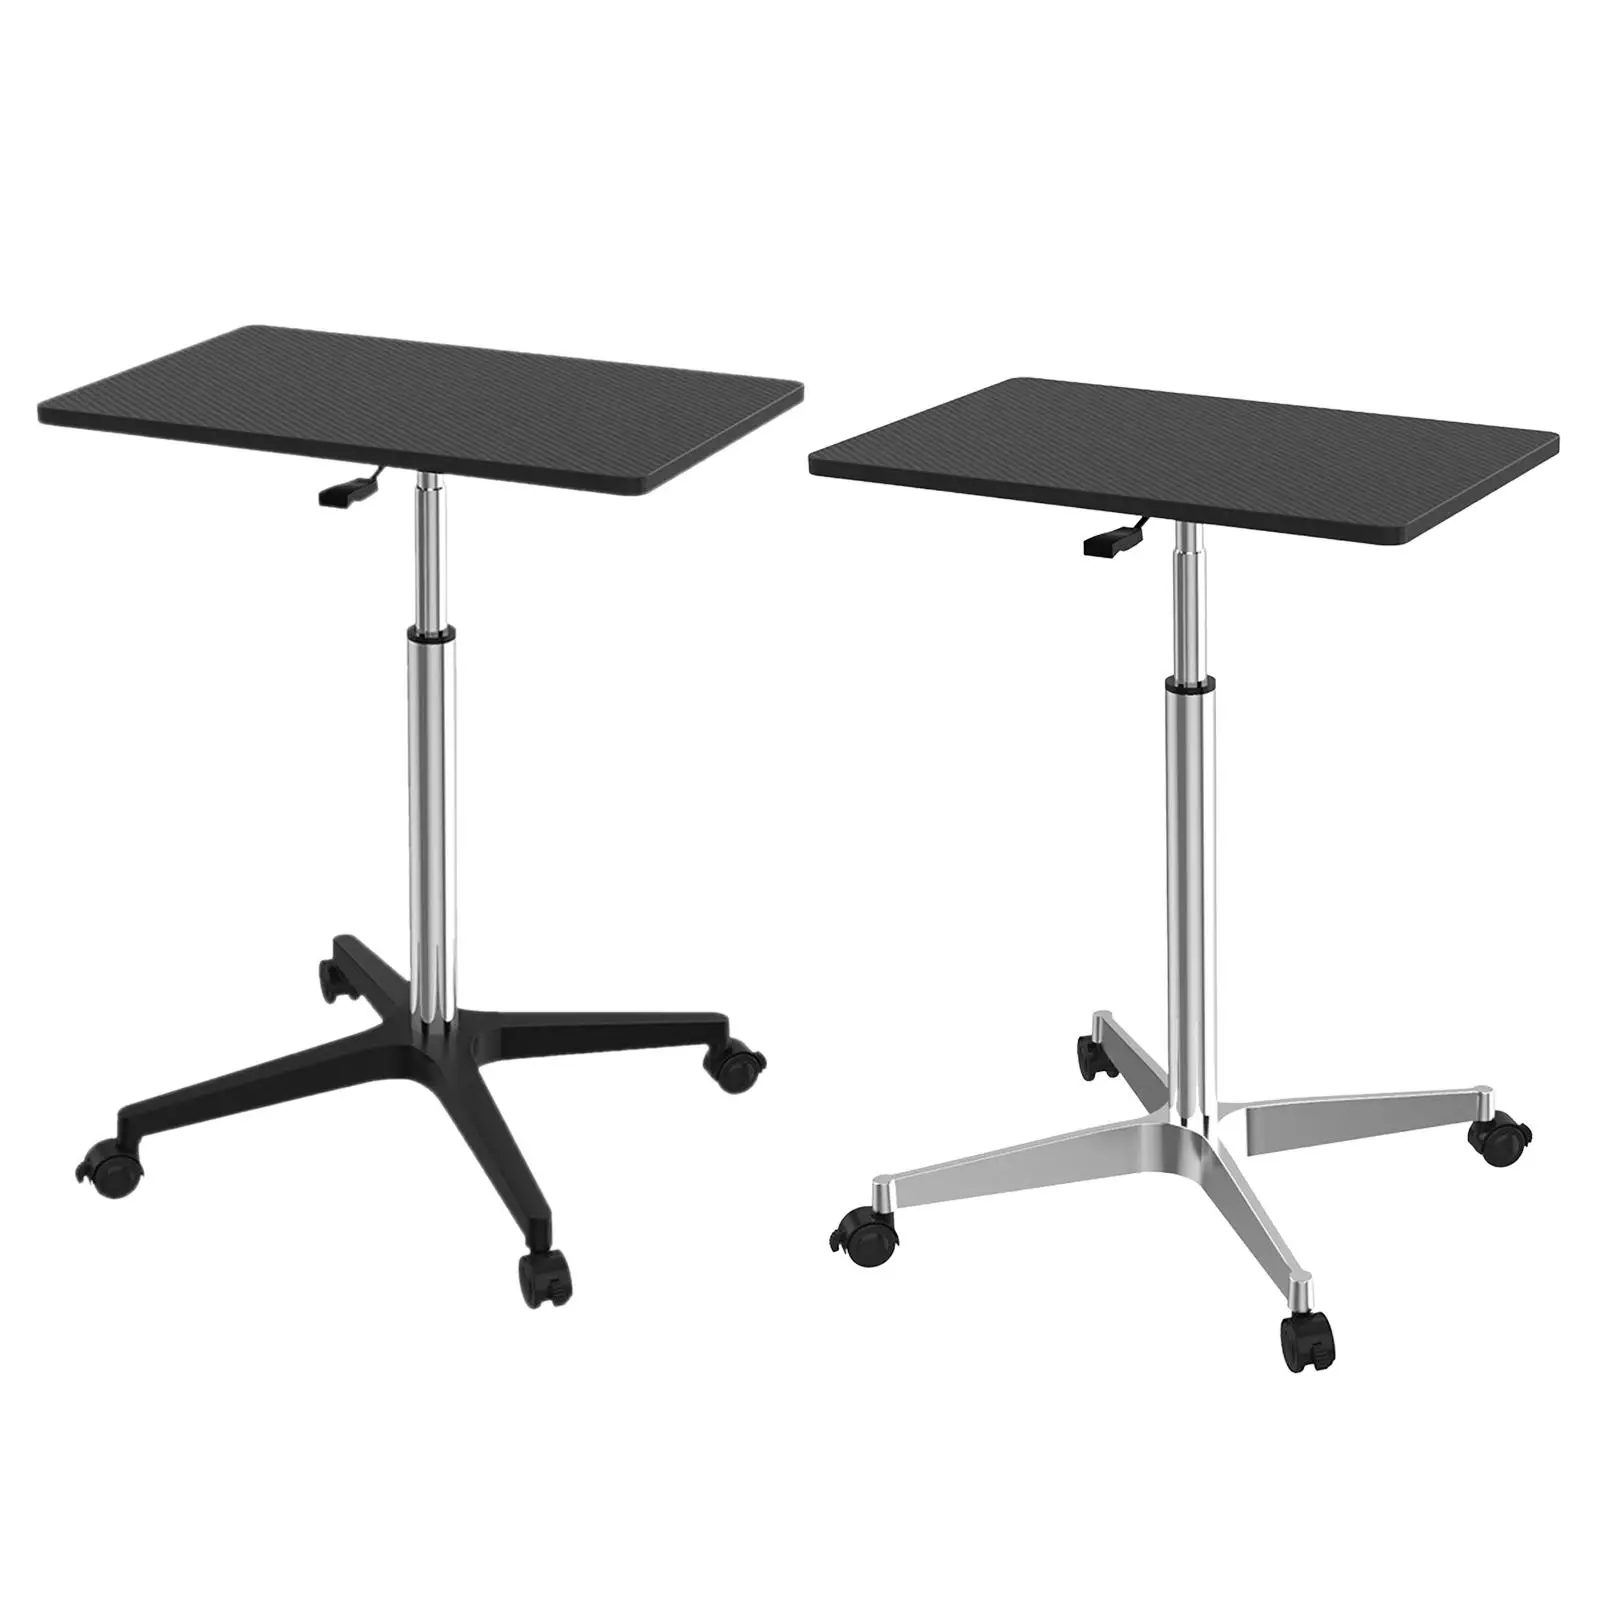 Adjustable Rolling Desk Laptop Standing Desk for Home Office Computer Desk Stand with Lockable Wheels Work Table Durable